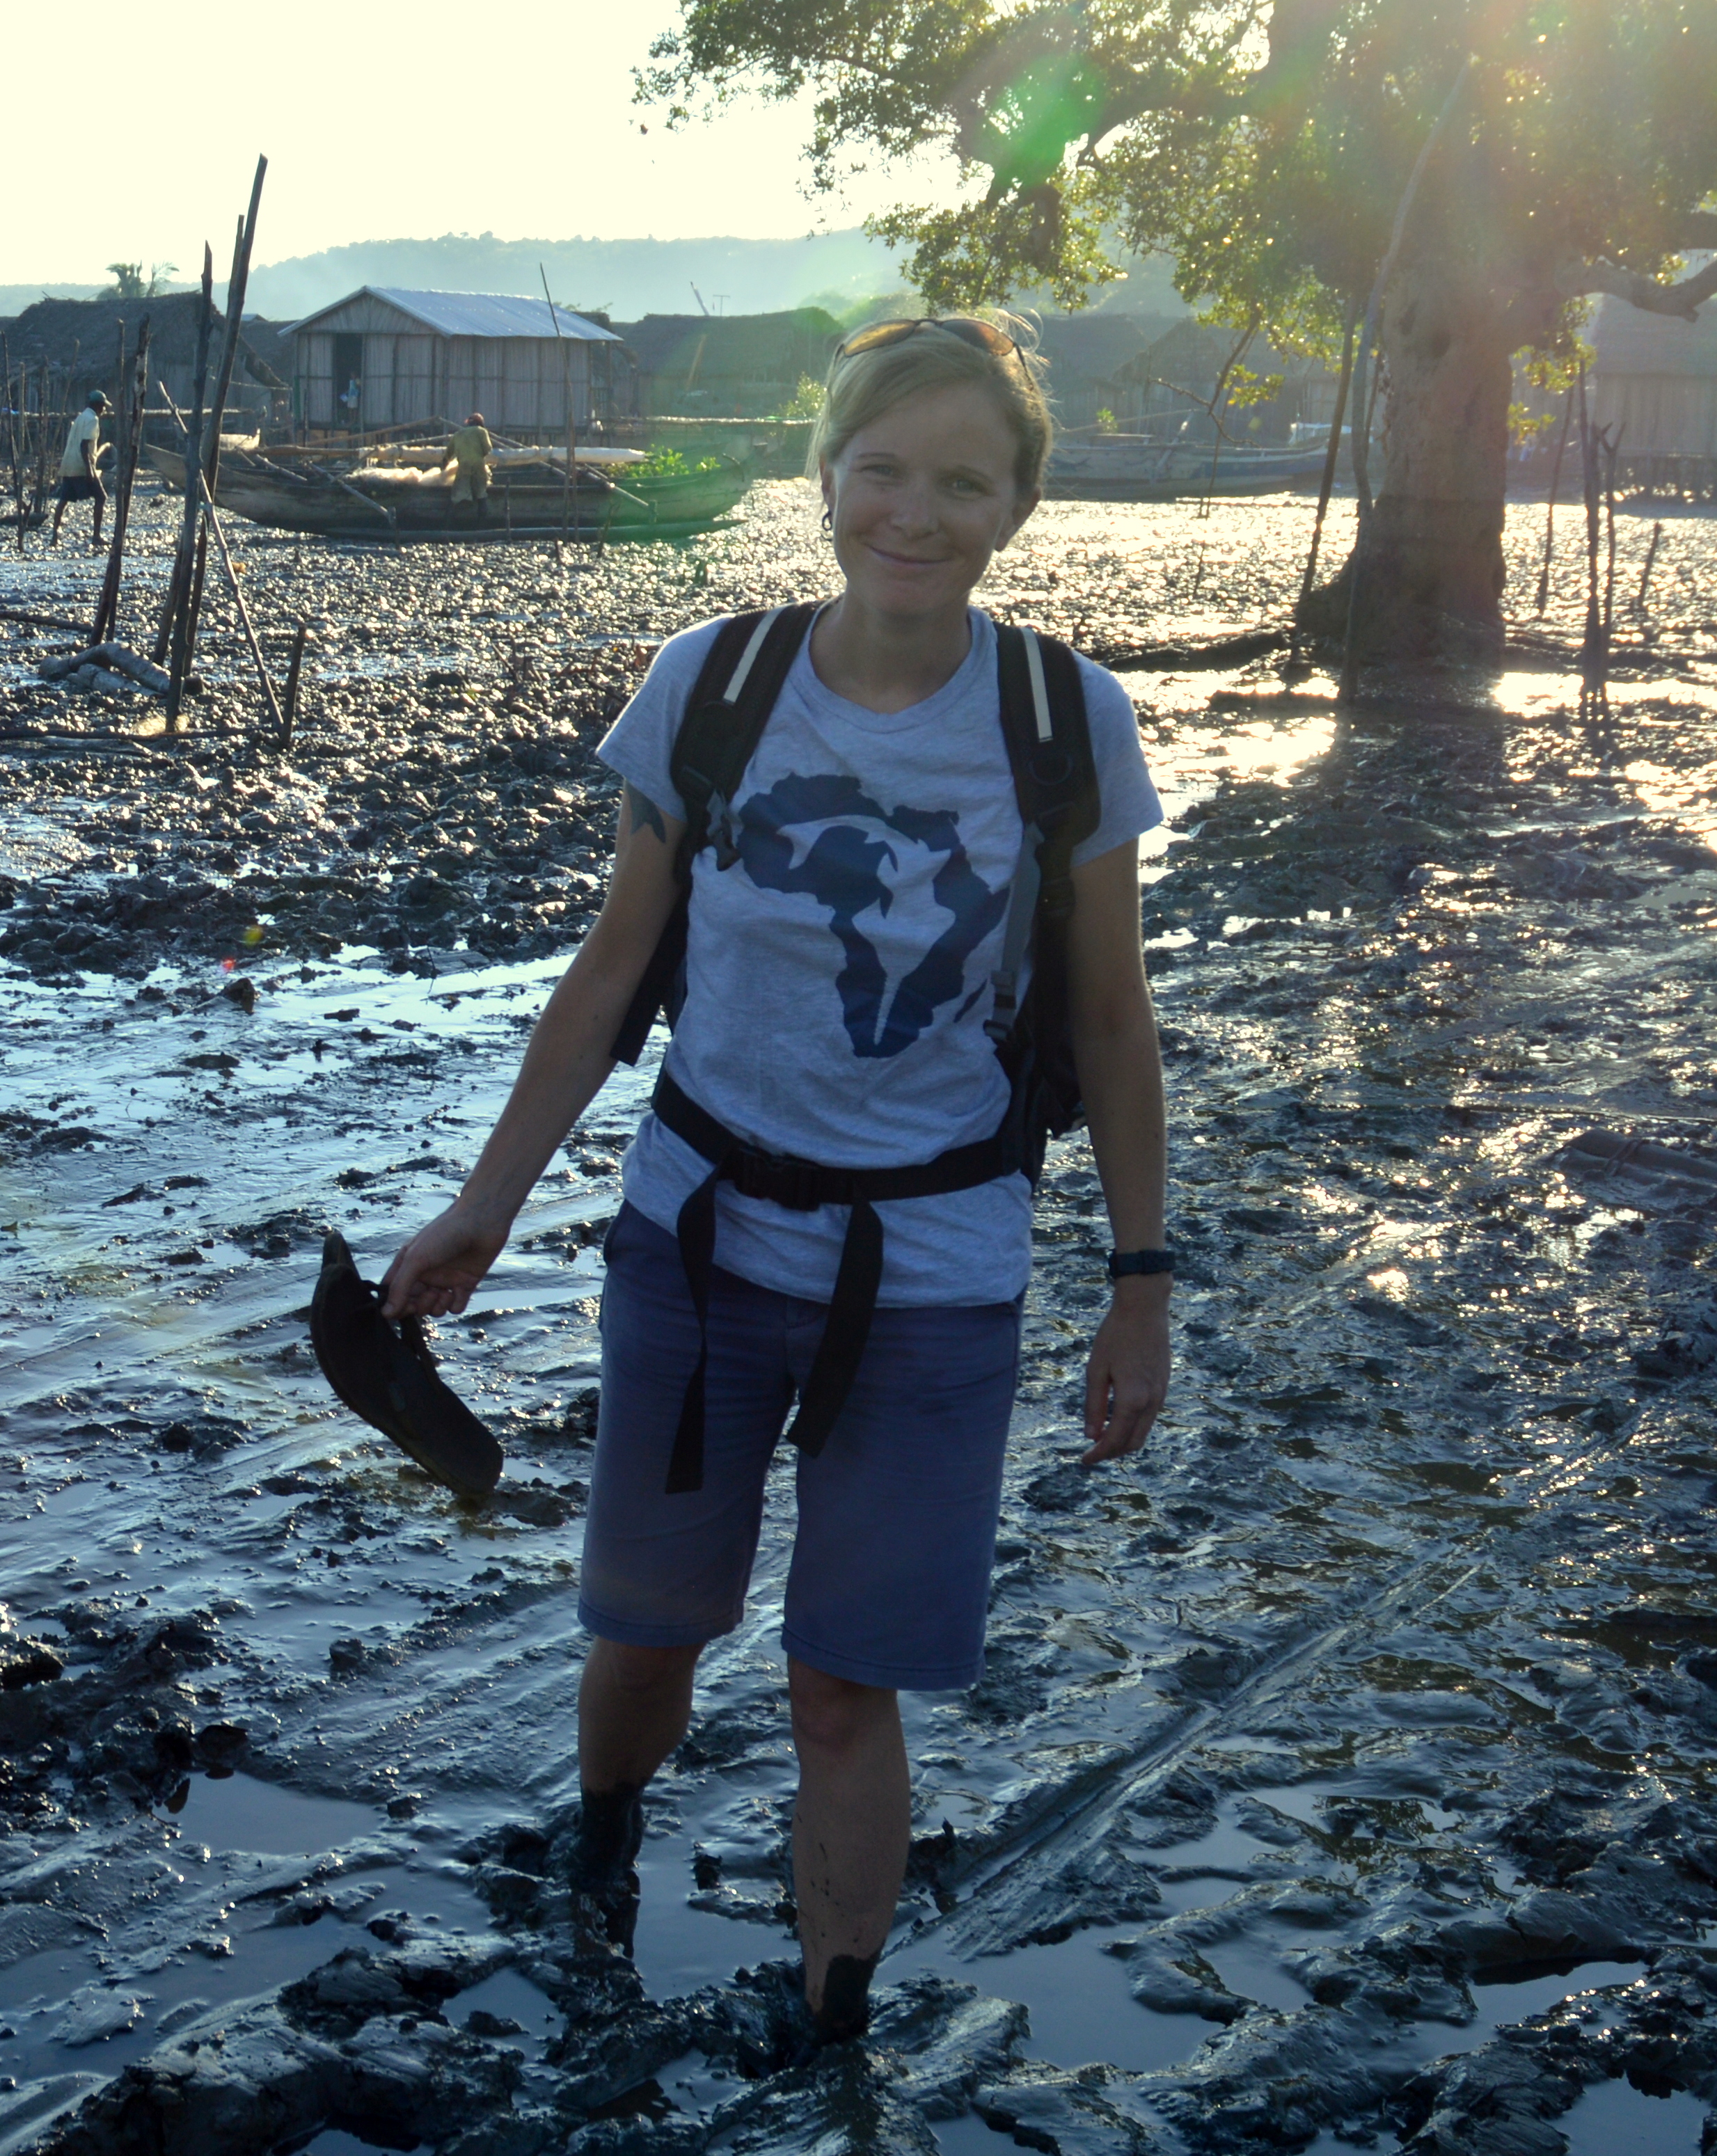 In case you think this work is glamorous... I'm just back from 3 days of camping in the village of Ankazomborona, amongst the mangroves and home to millions of mosquitos. Getting on and off pirogues (the wooden canoes used by local fishers) involved wading through the mudflats, sometimes up to our knees!